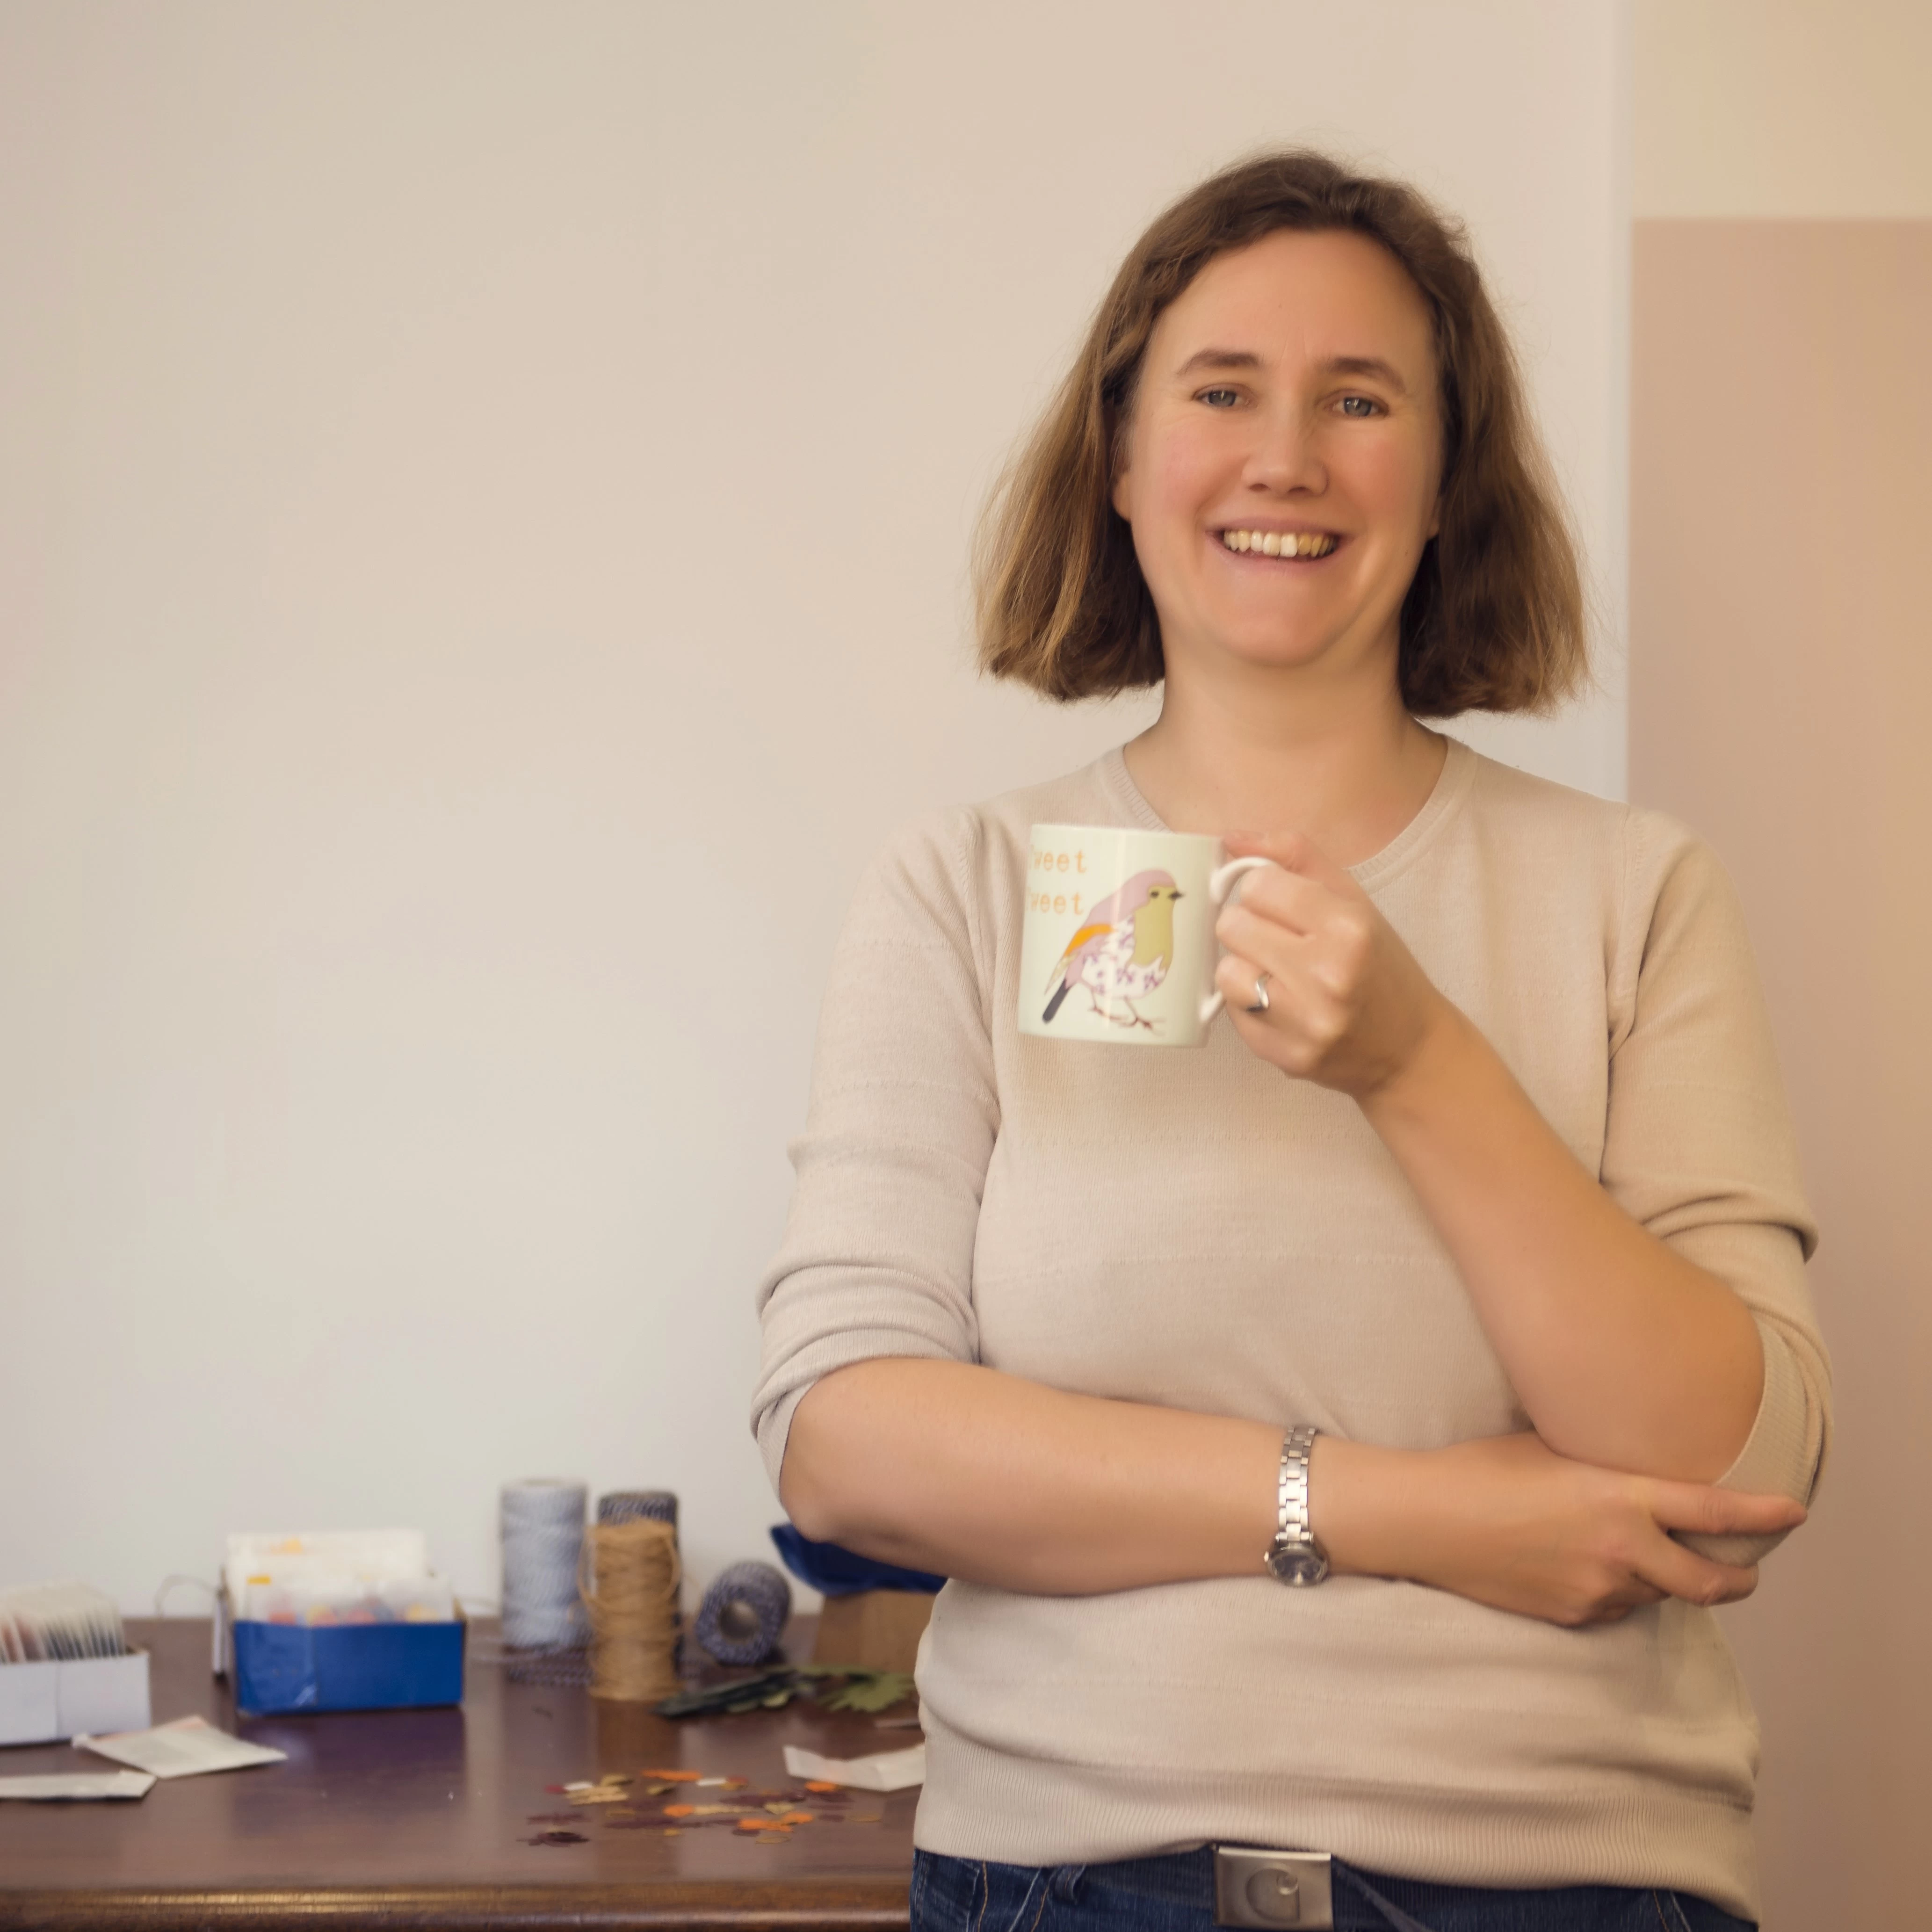 Rosie standing in front of her studio work bench, smiling  and holding a mug of tea